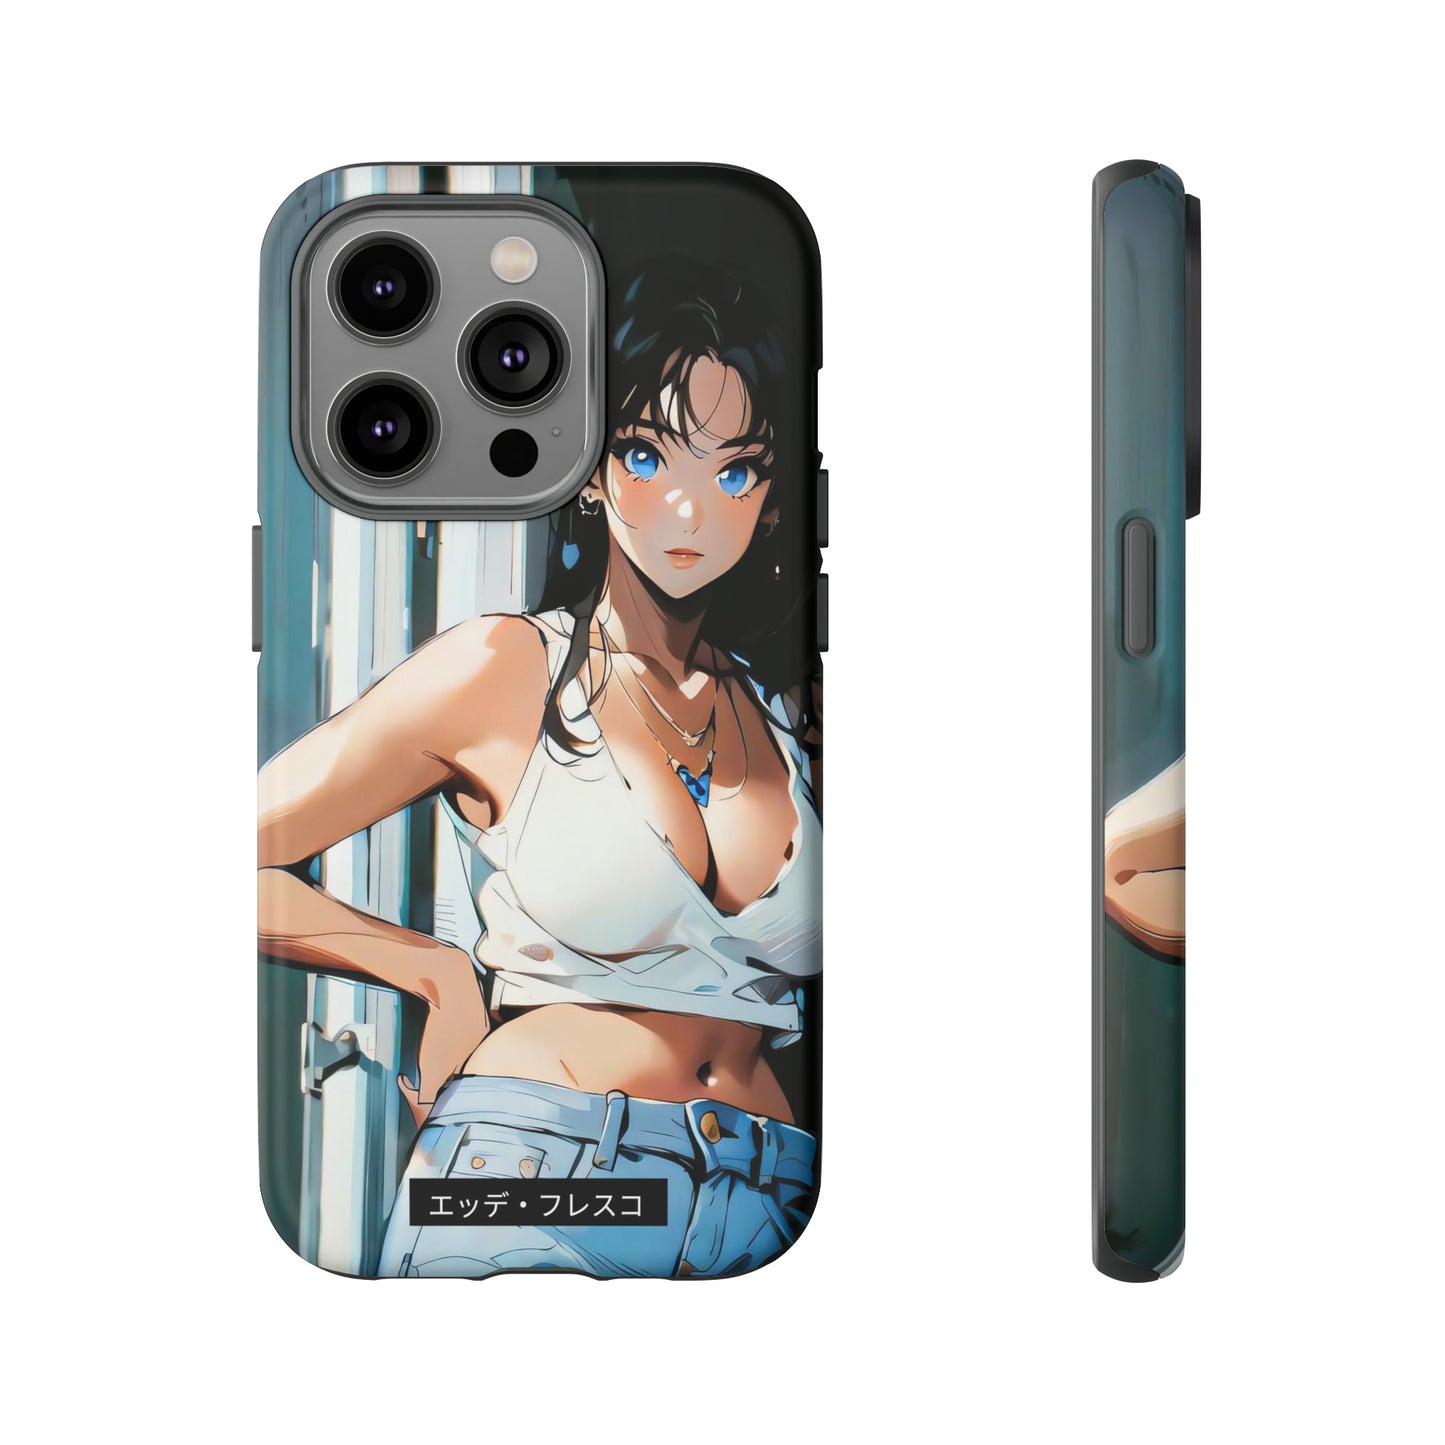 Anime Style Art Tough Cases- "She's Not Impressed"